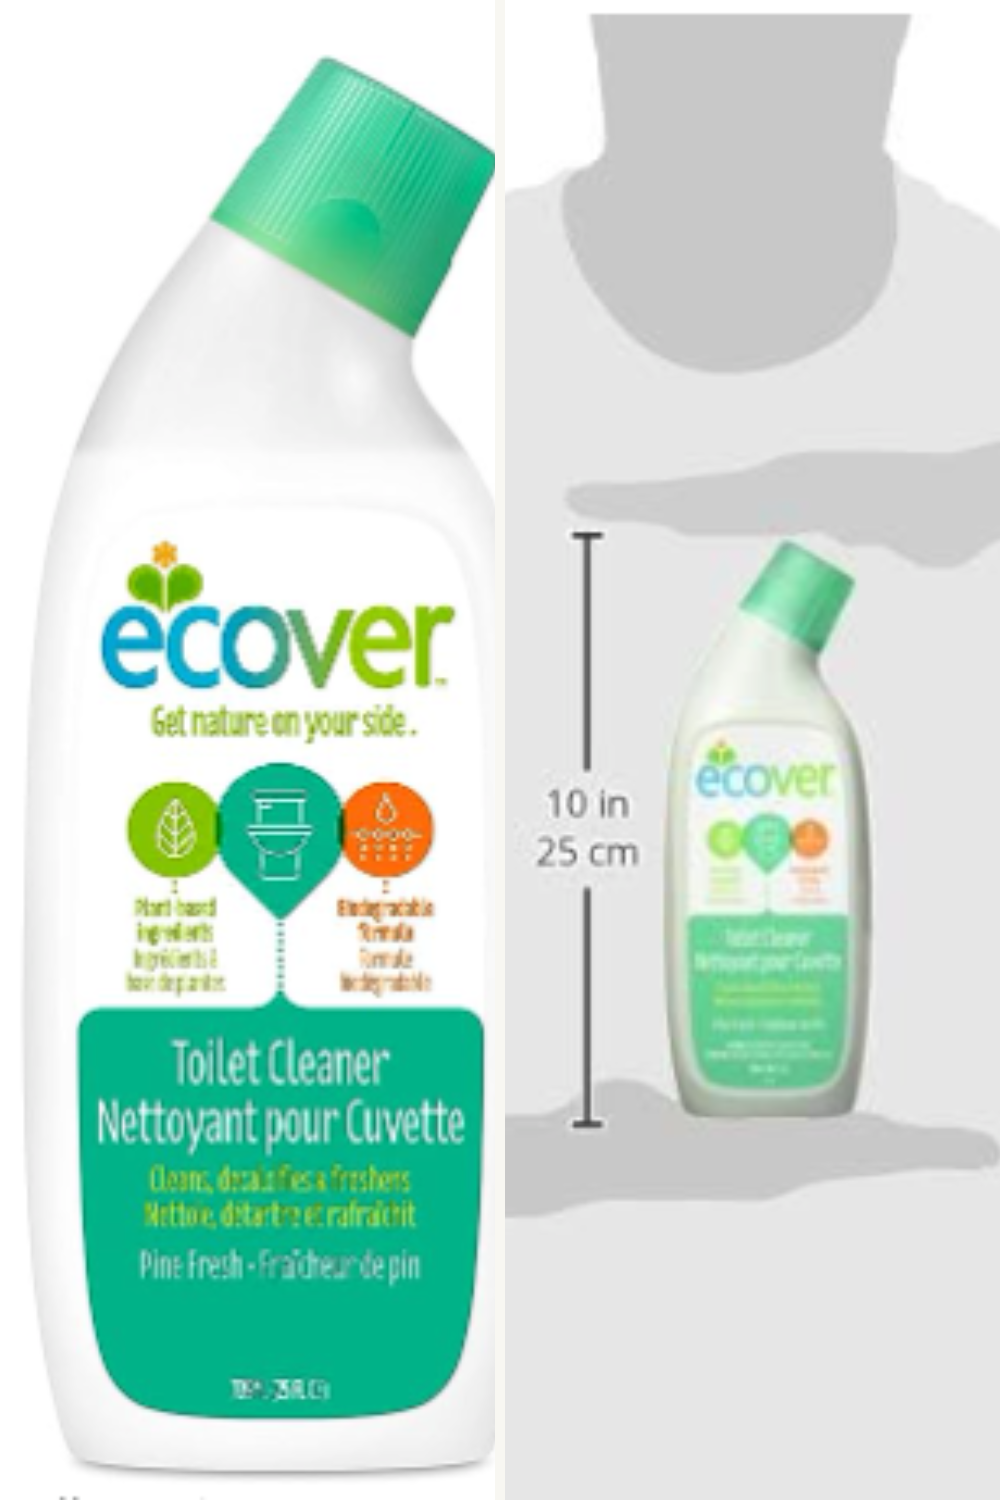 Ecover toilet bowl cleaner